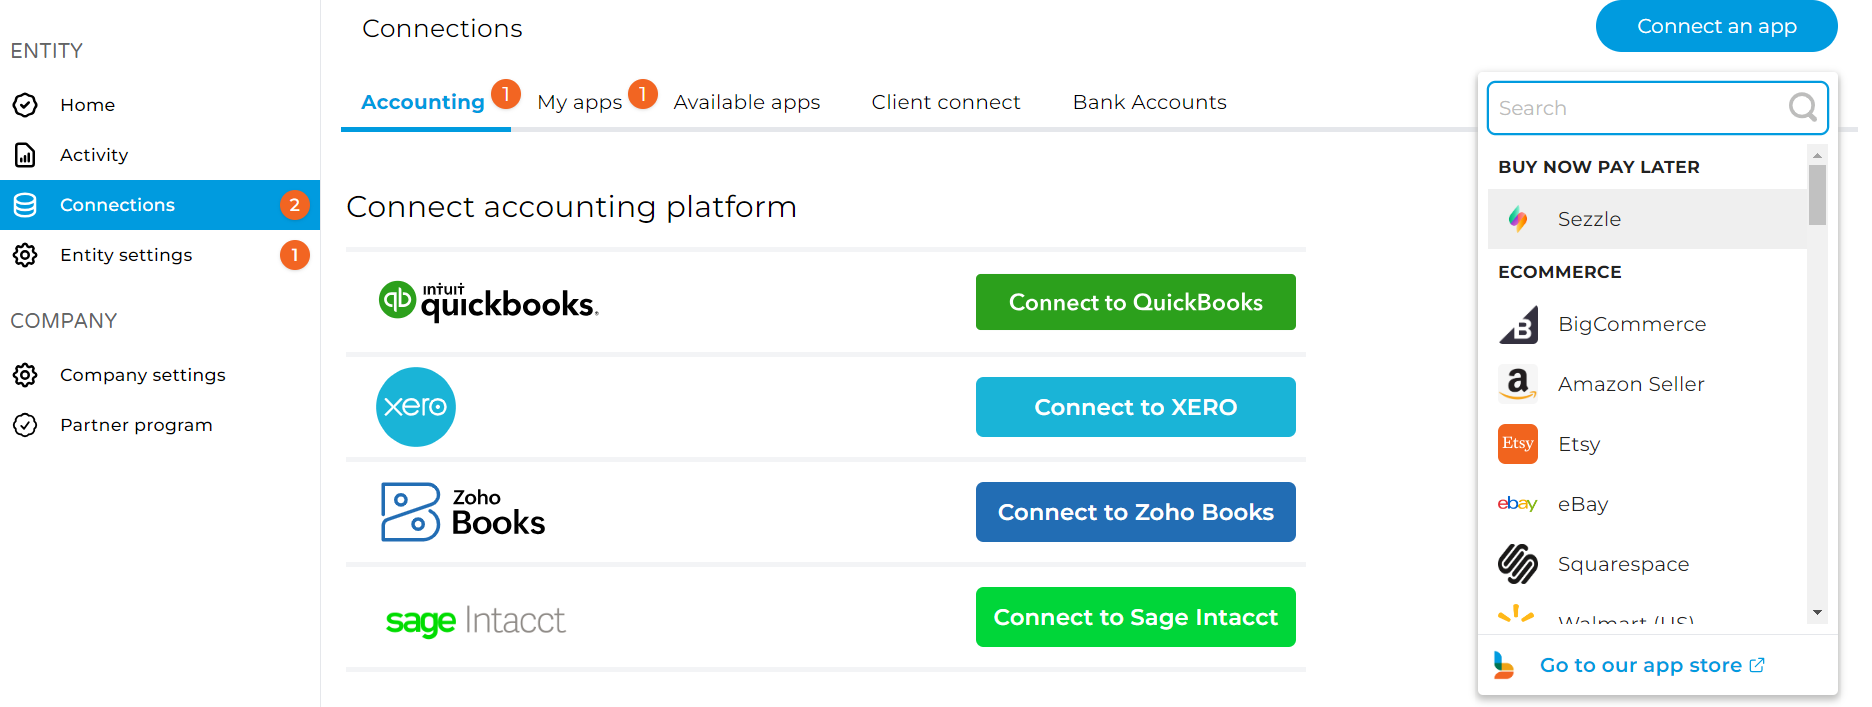 Connecting accounting platform and apps